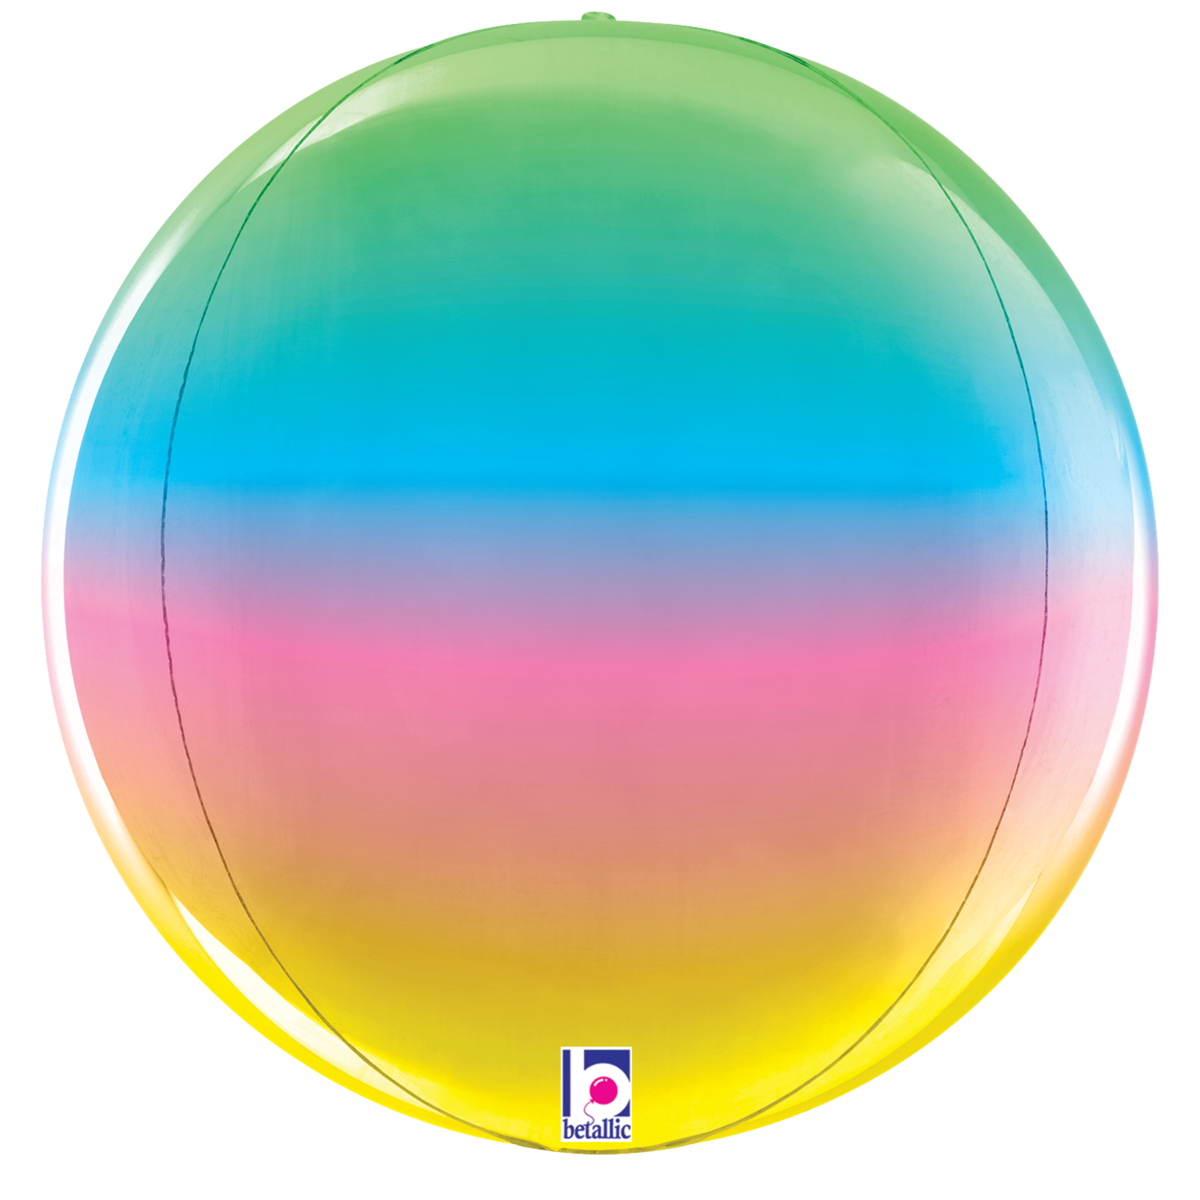 25030_DimensionalGlobeRainbow_FrontBack1200x1200.png